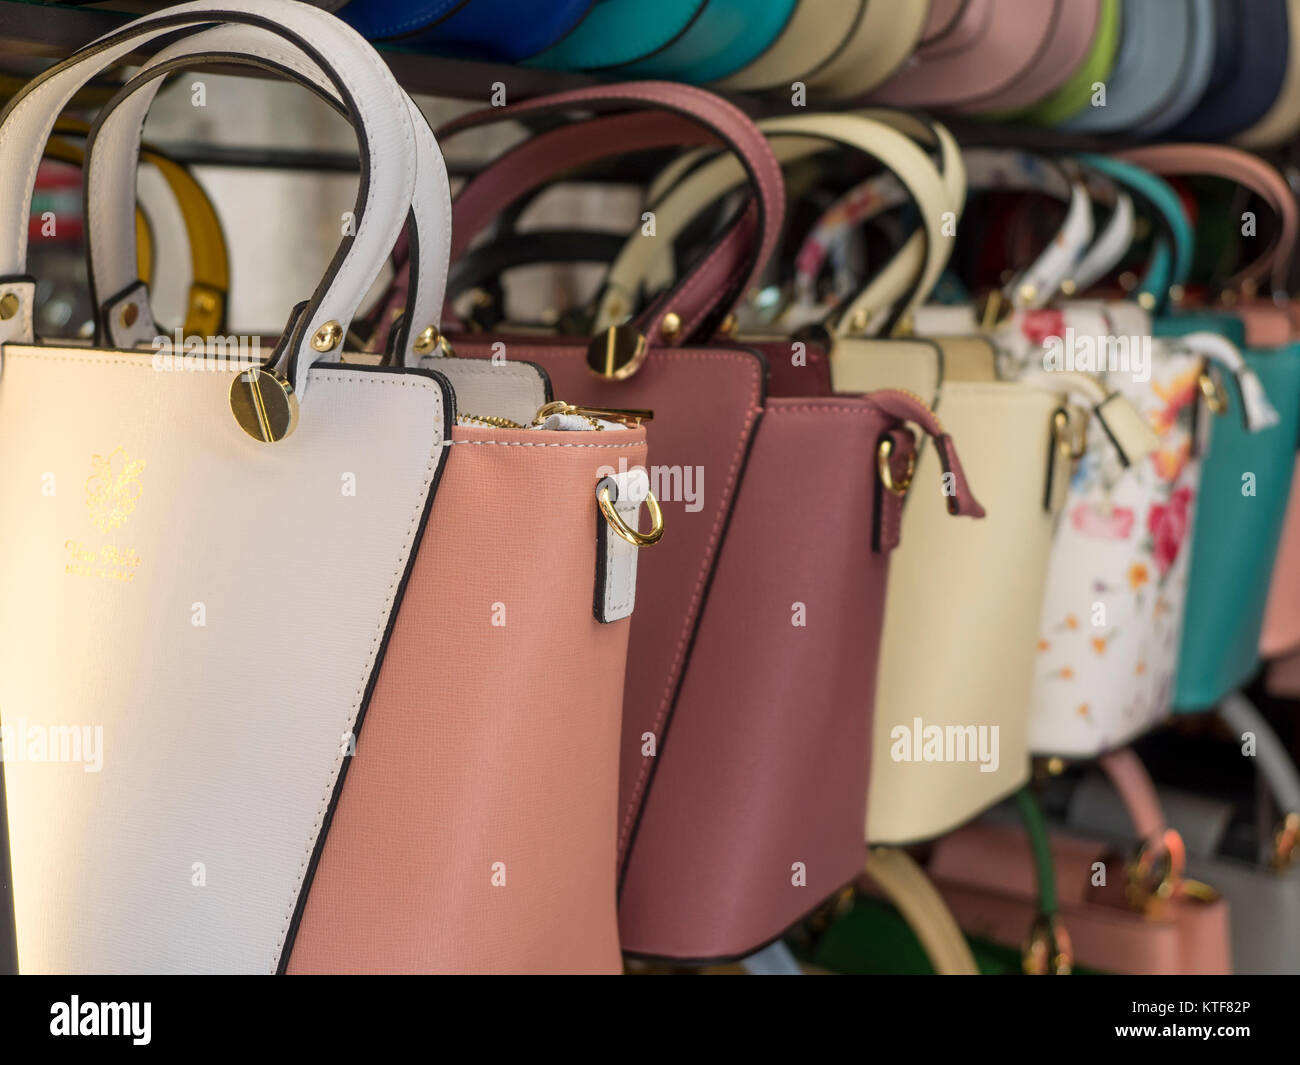 VENICE, ITALY - SEPTEMBER 13, 2017:   Leather handbags for sale outside shop Stock Photo